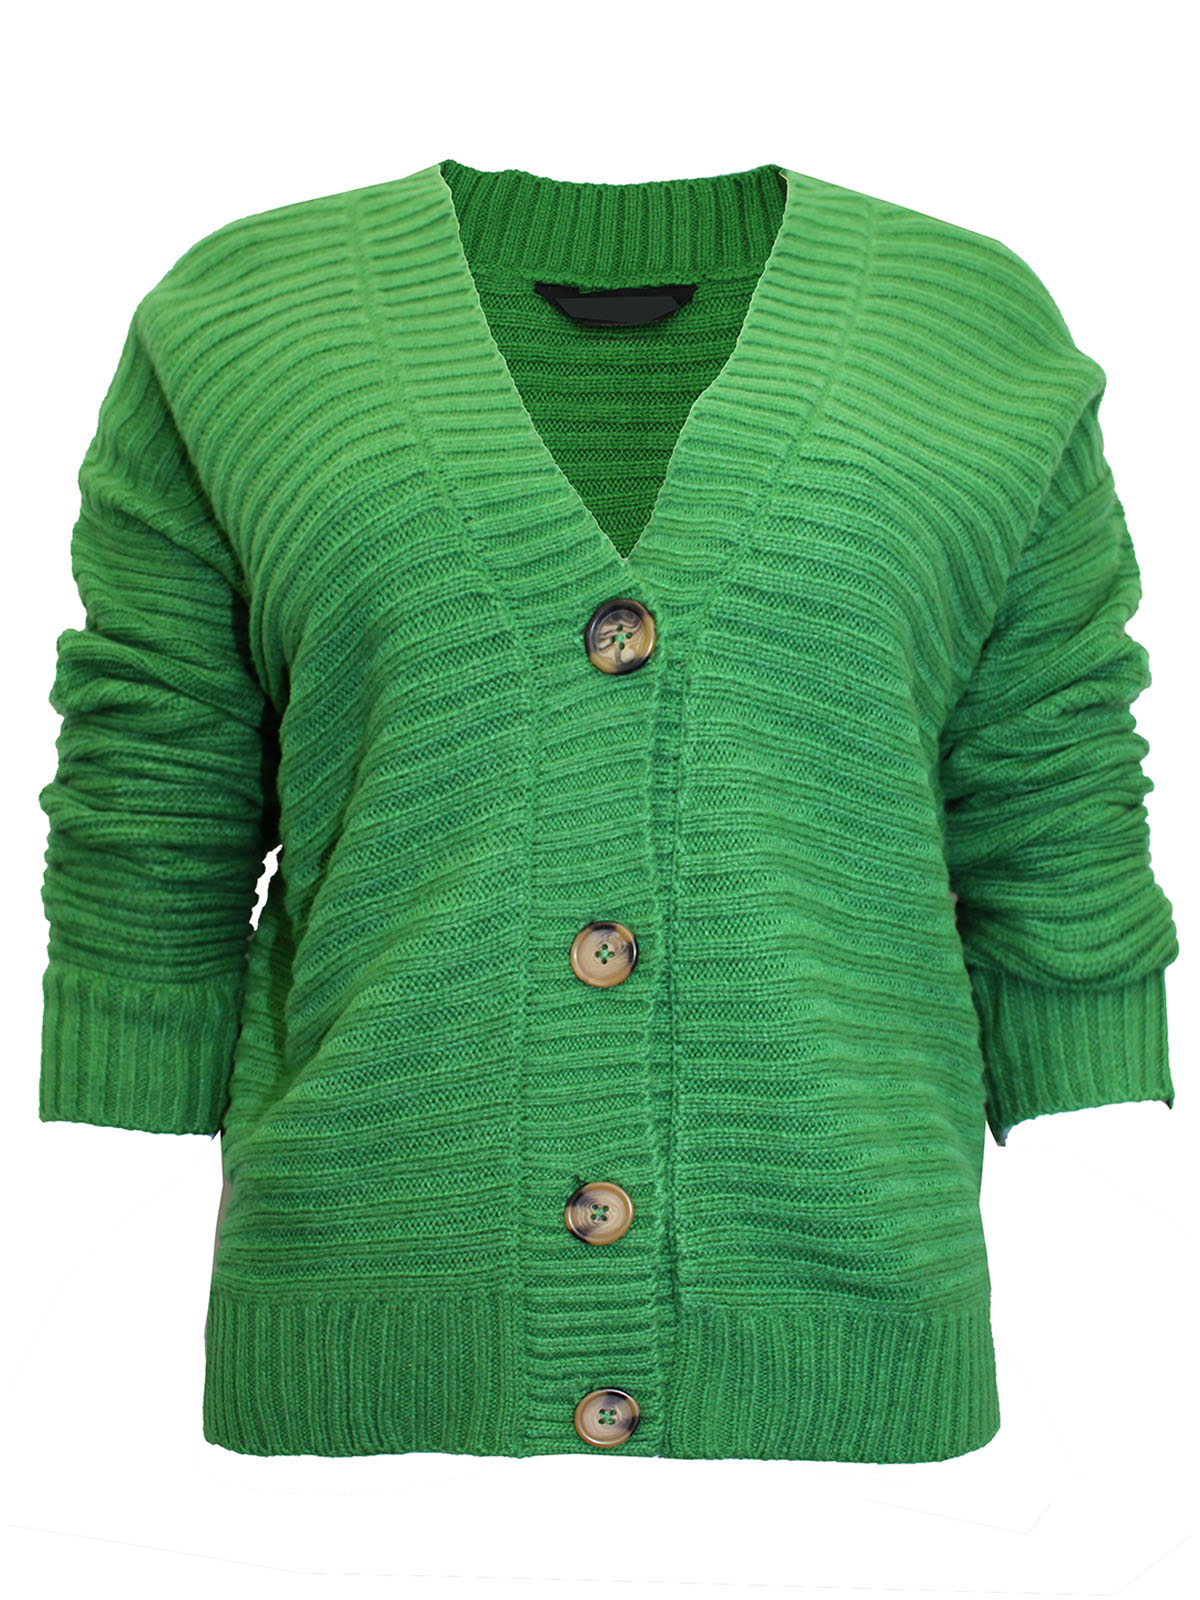 CURVE - - GREEN Button Through Knitted Cardigan - Plus Size 14 to 22/24